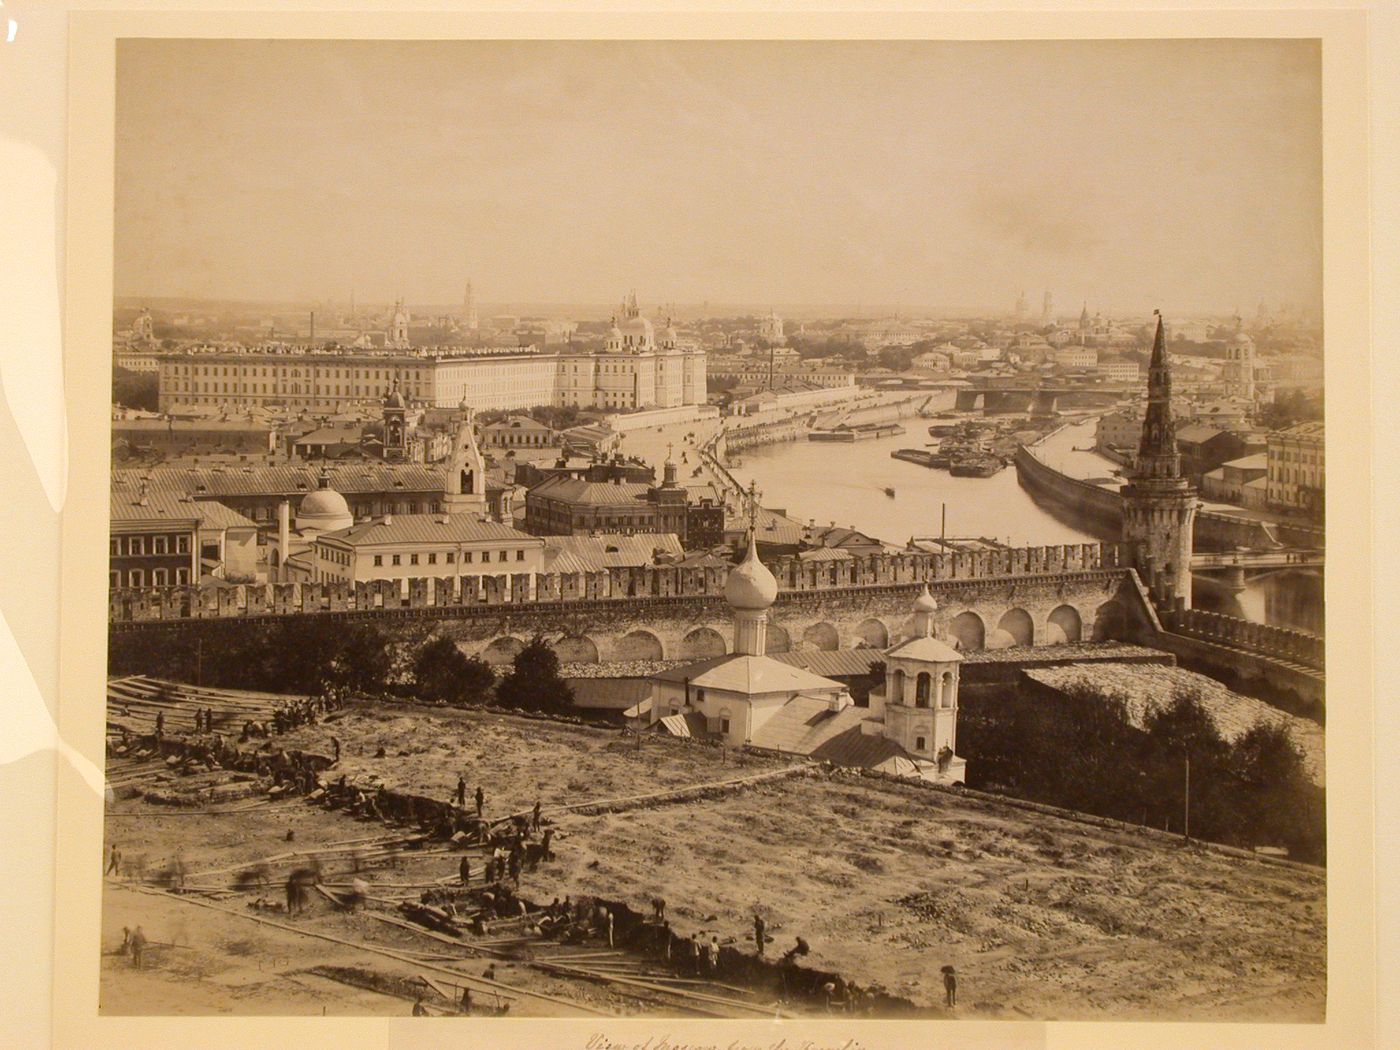 View of Moscow from the Kremlin showing the Vospitatelnyi Dom (Foundling Home), Moscow